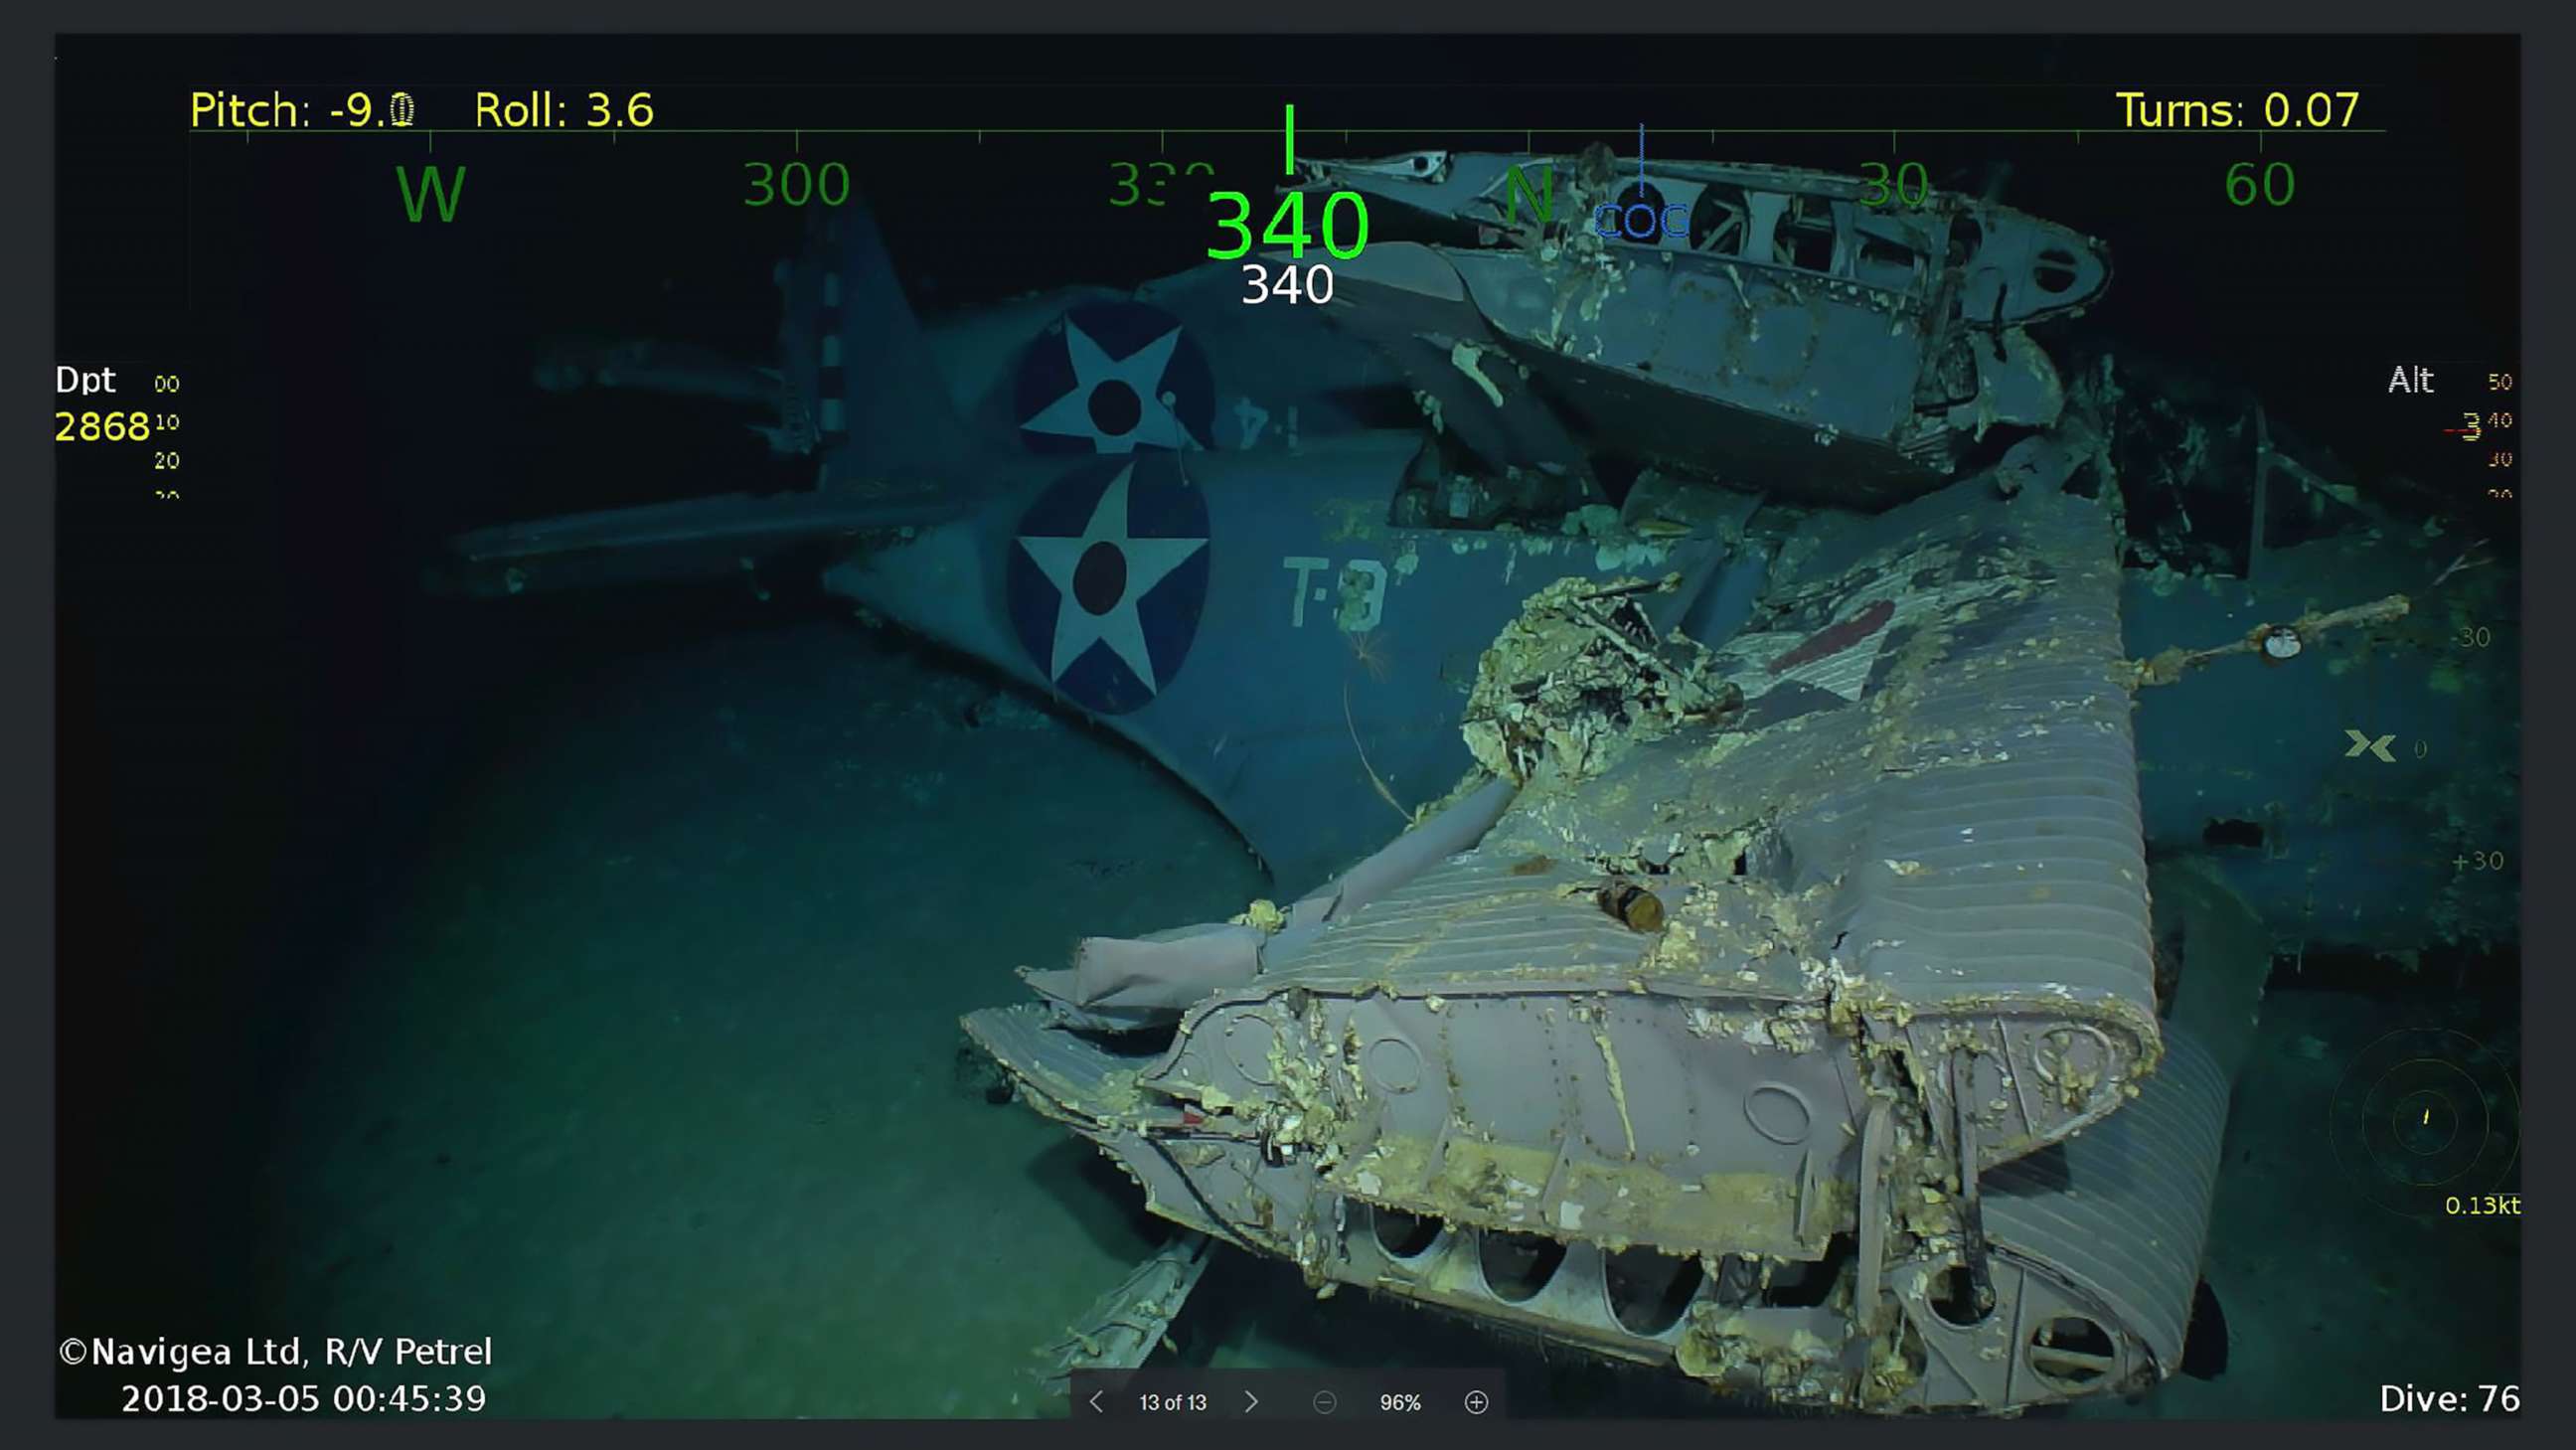 PHOTO: The USS Lexington, a U.S. aircraft carrier which sank during World War II, has been found in the Coral Sea. A search team led by Microsoft co-founder Paul G. Allen discovered the wreckage, March 5, 2018.